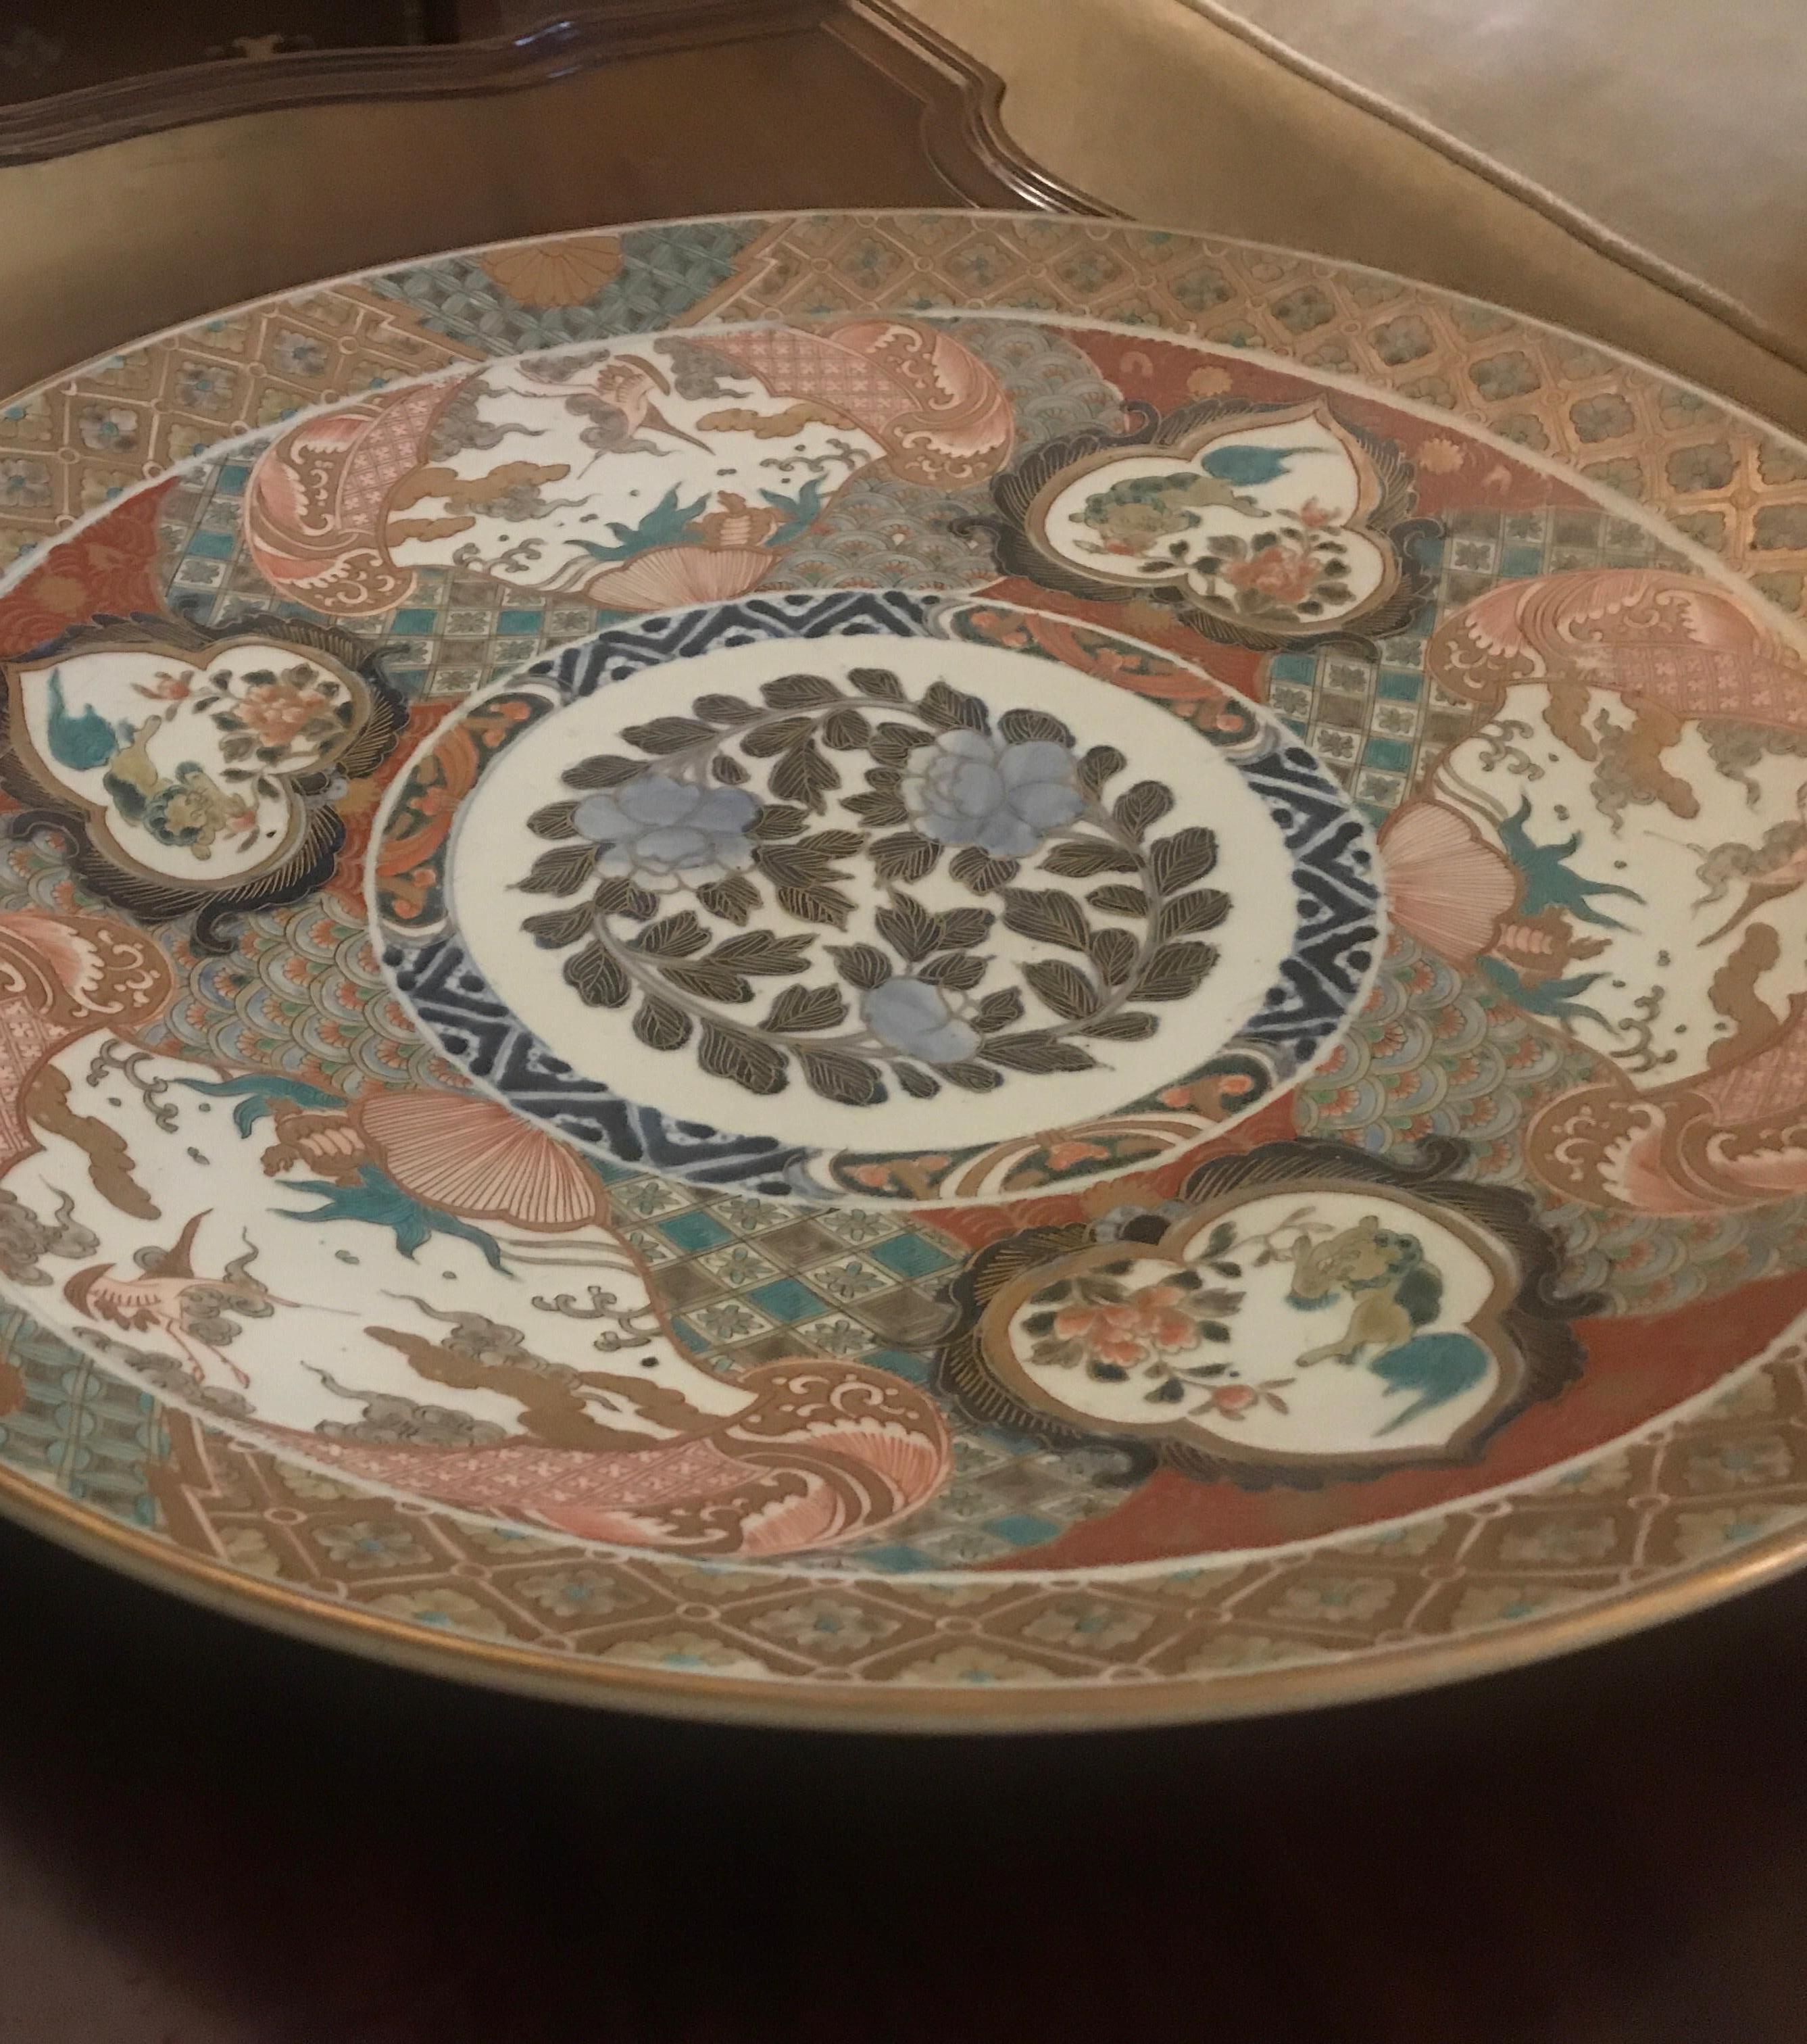 Large 18 inch diameter hand painted Imari Japanese porcelain charger. The detailed hand painted decoration with classic iron red, cobalt blue with gilt accents.